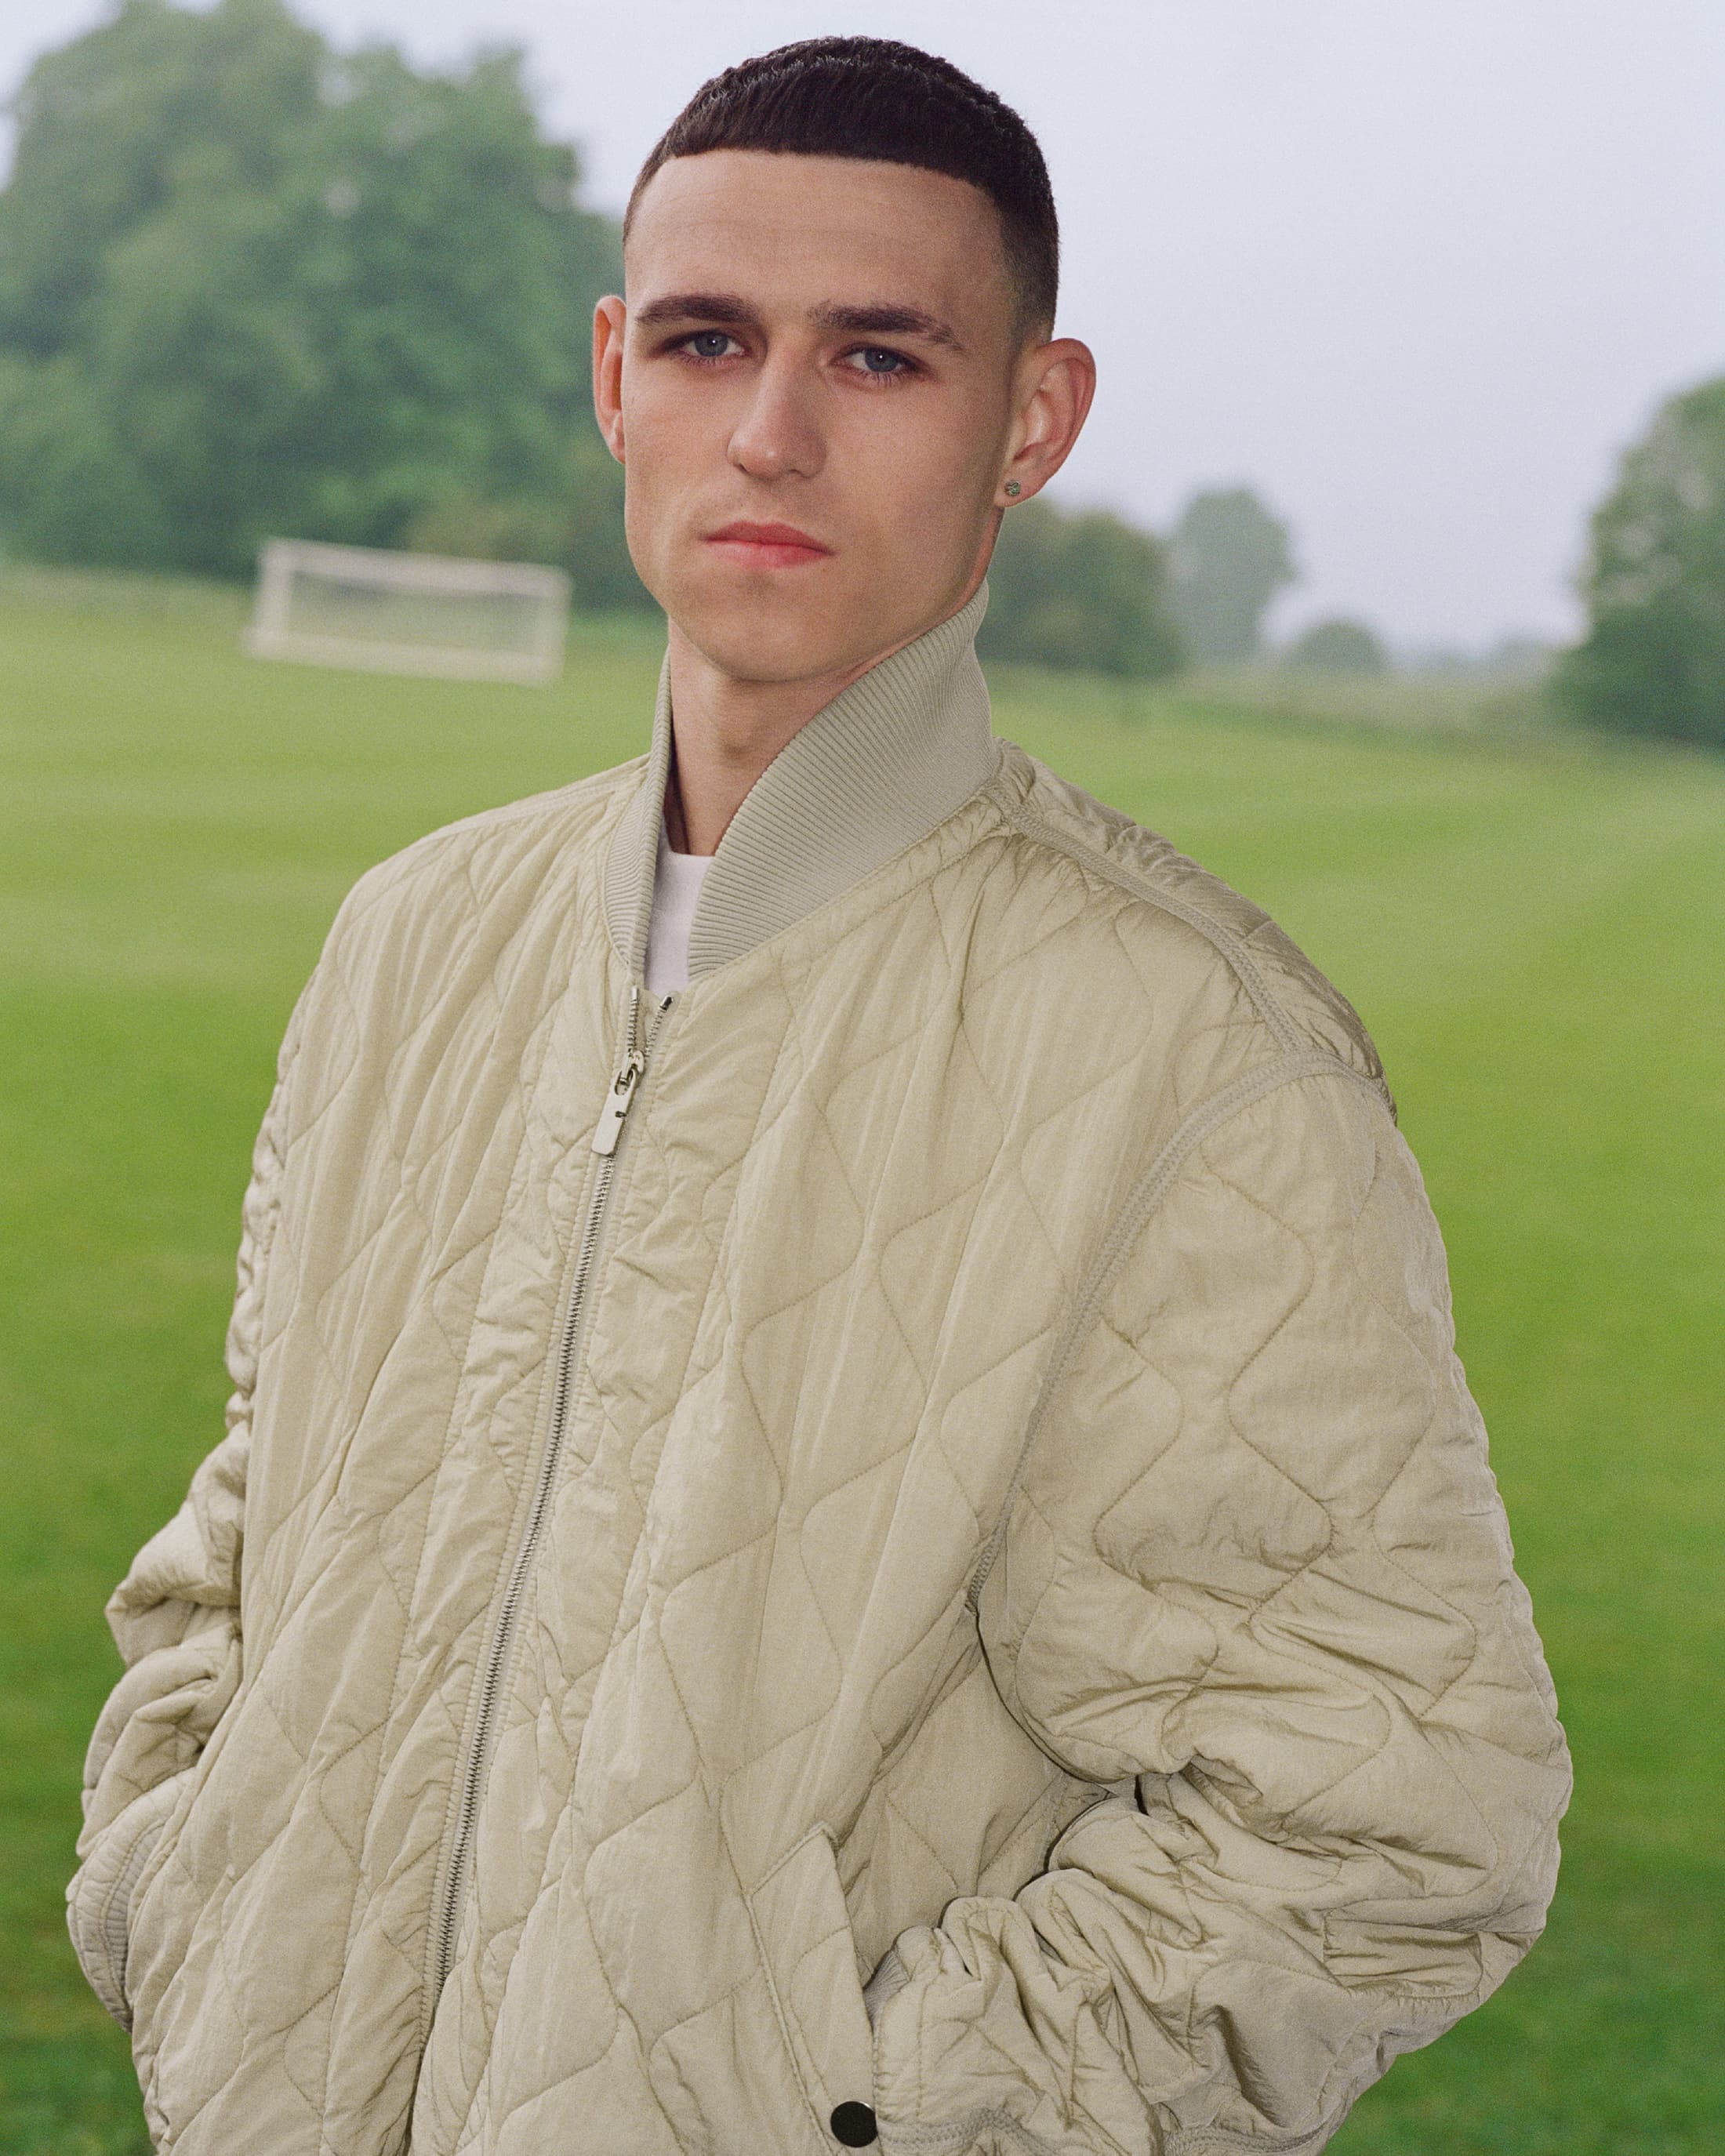 Burbewrry releases a Series of Football thmed portraits featuring Phil Foden and Eberechi Eze